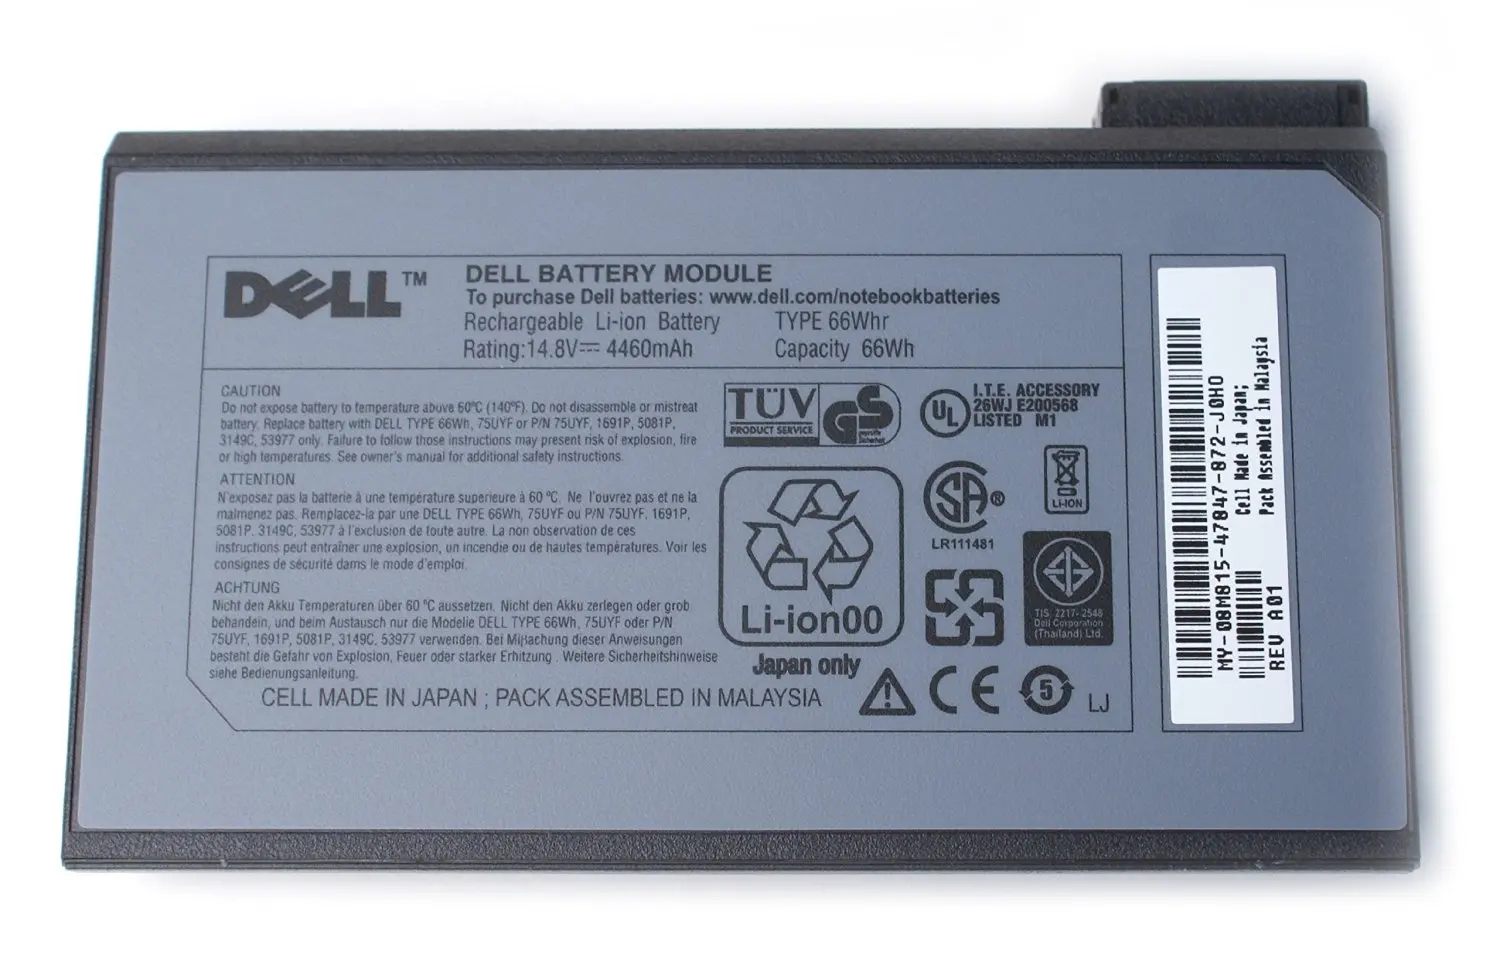 Find battery. Dell Latitude c600. Dell Battery Module Type 66whr. Dell d620 Battery перепаковка. Dell Latitude c640 Battery,.